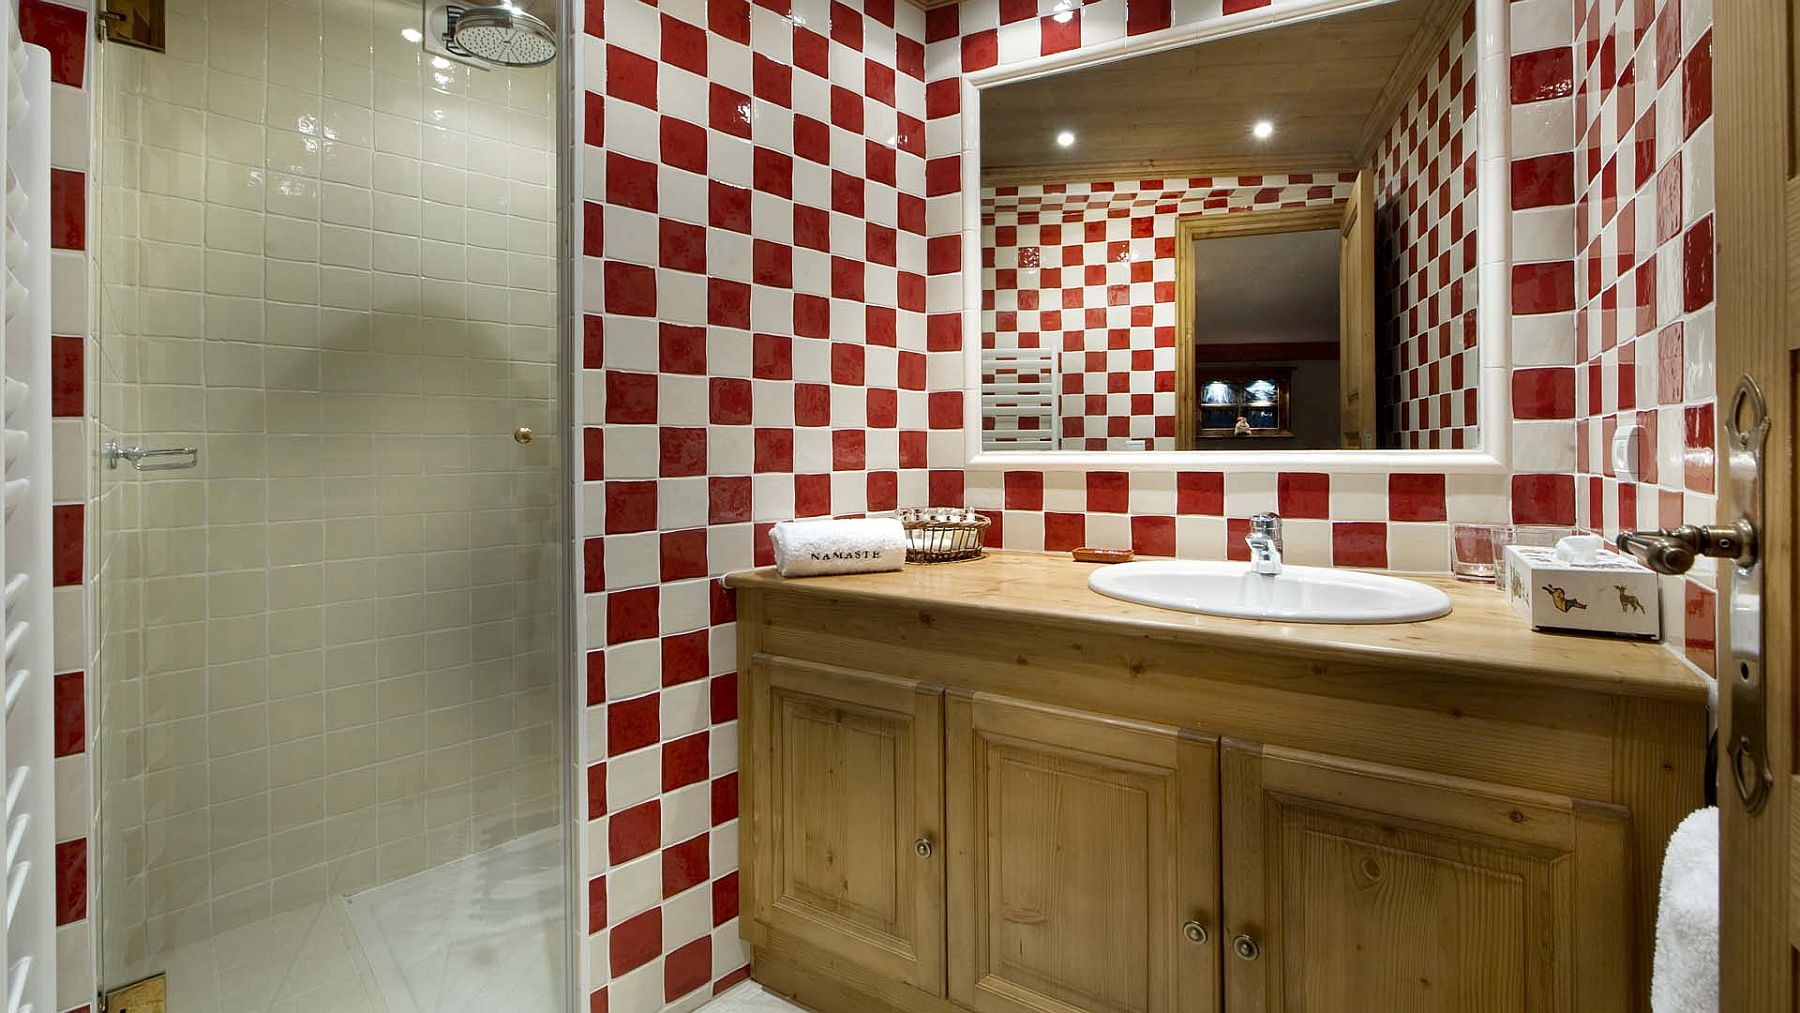 Bathroom-in-red-and-white-and-wooden-vanity